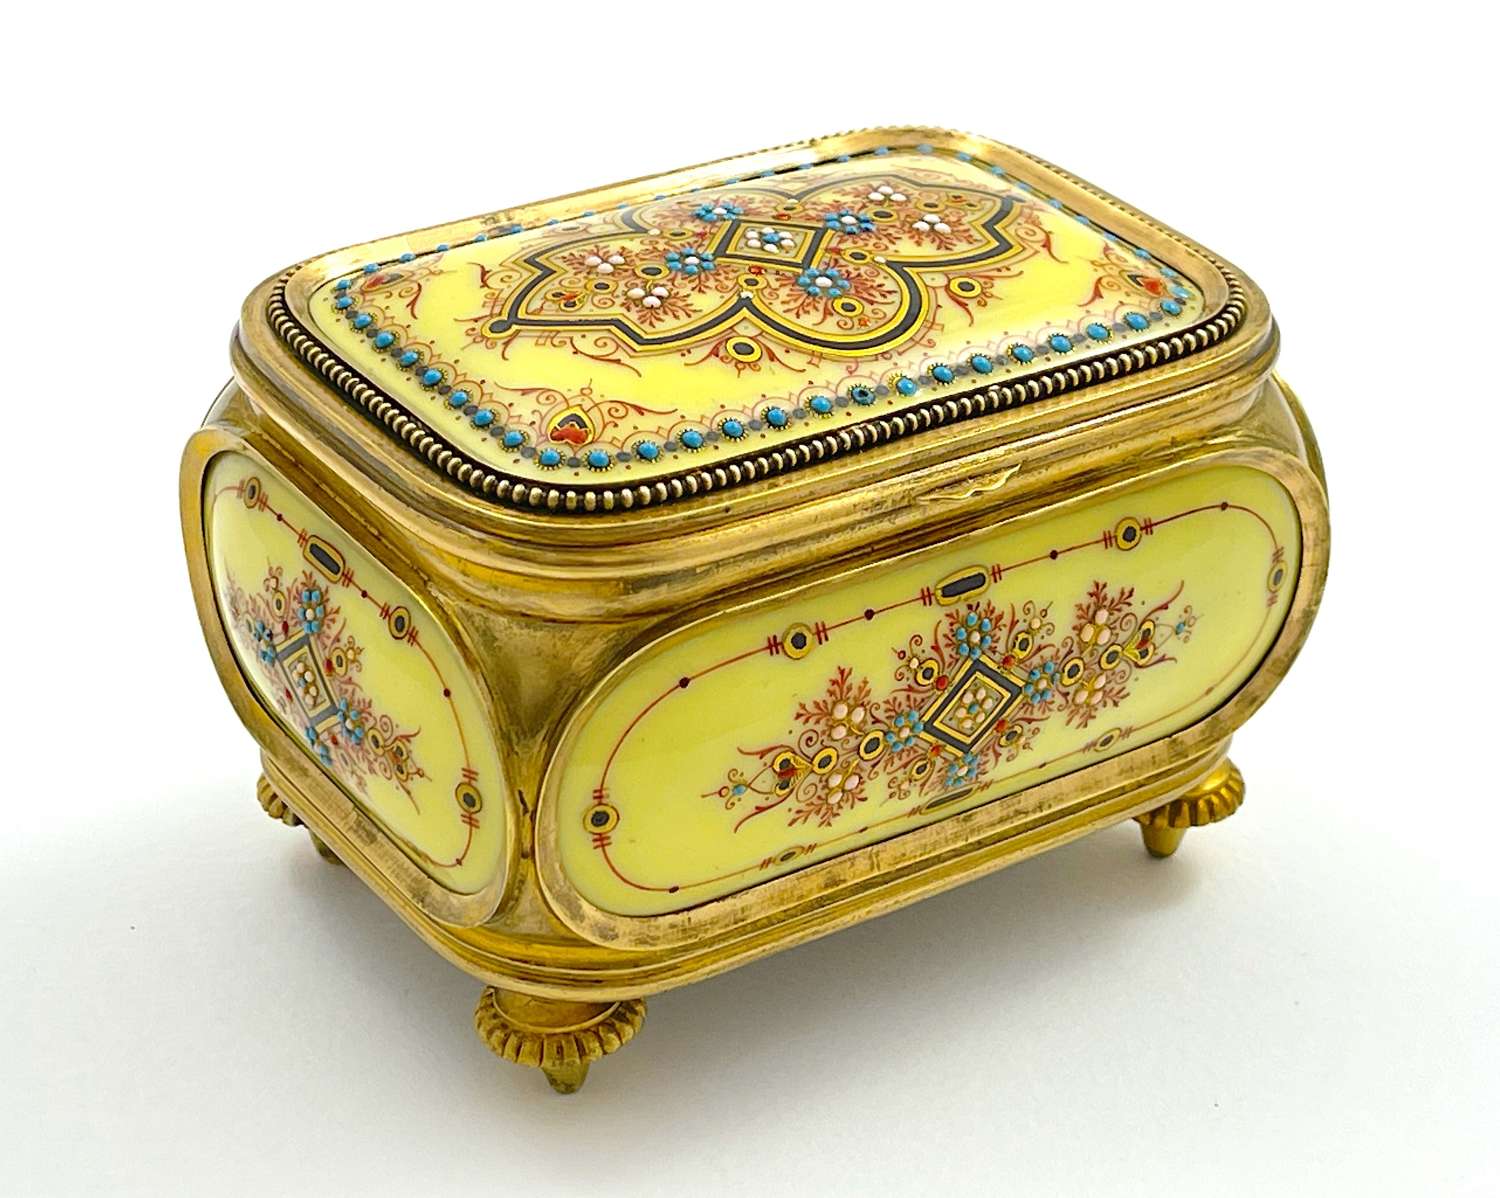 Antique French 'Bombe' Jewel Casket with Enamelled Panels by Tahan.